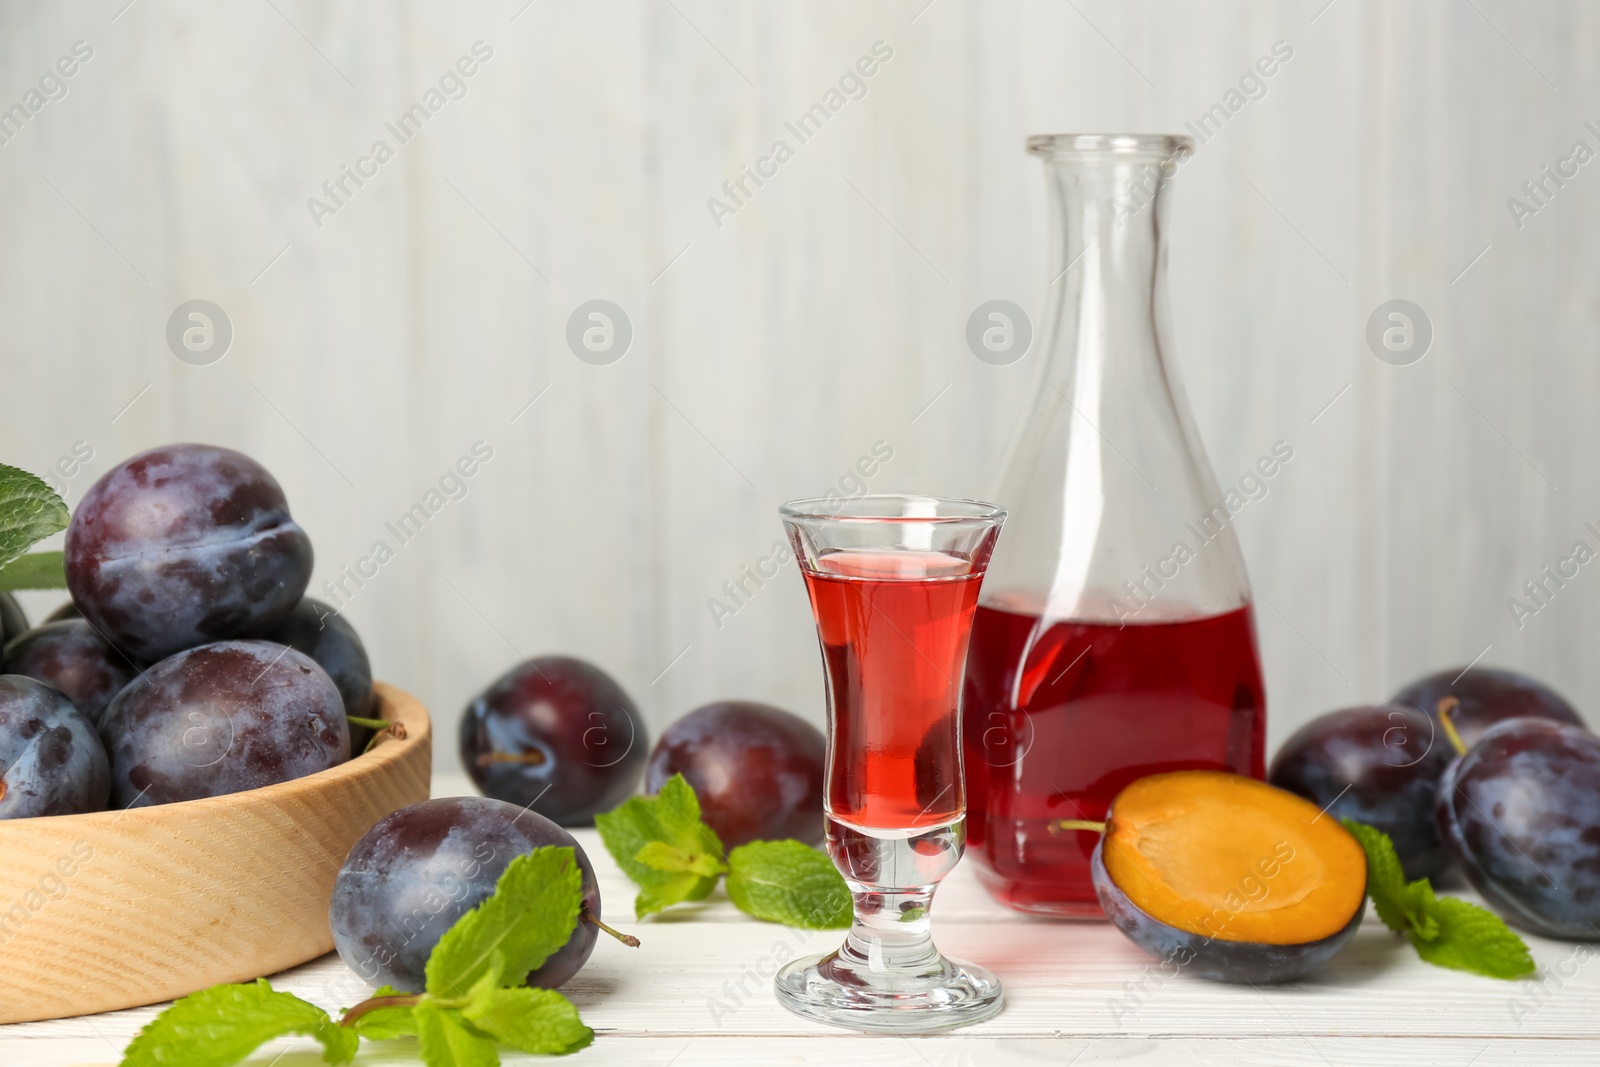 Photo of Delicious plum liquor, ripe fruits and mint on white wooden table. Homemade strong alcoholic beverage